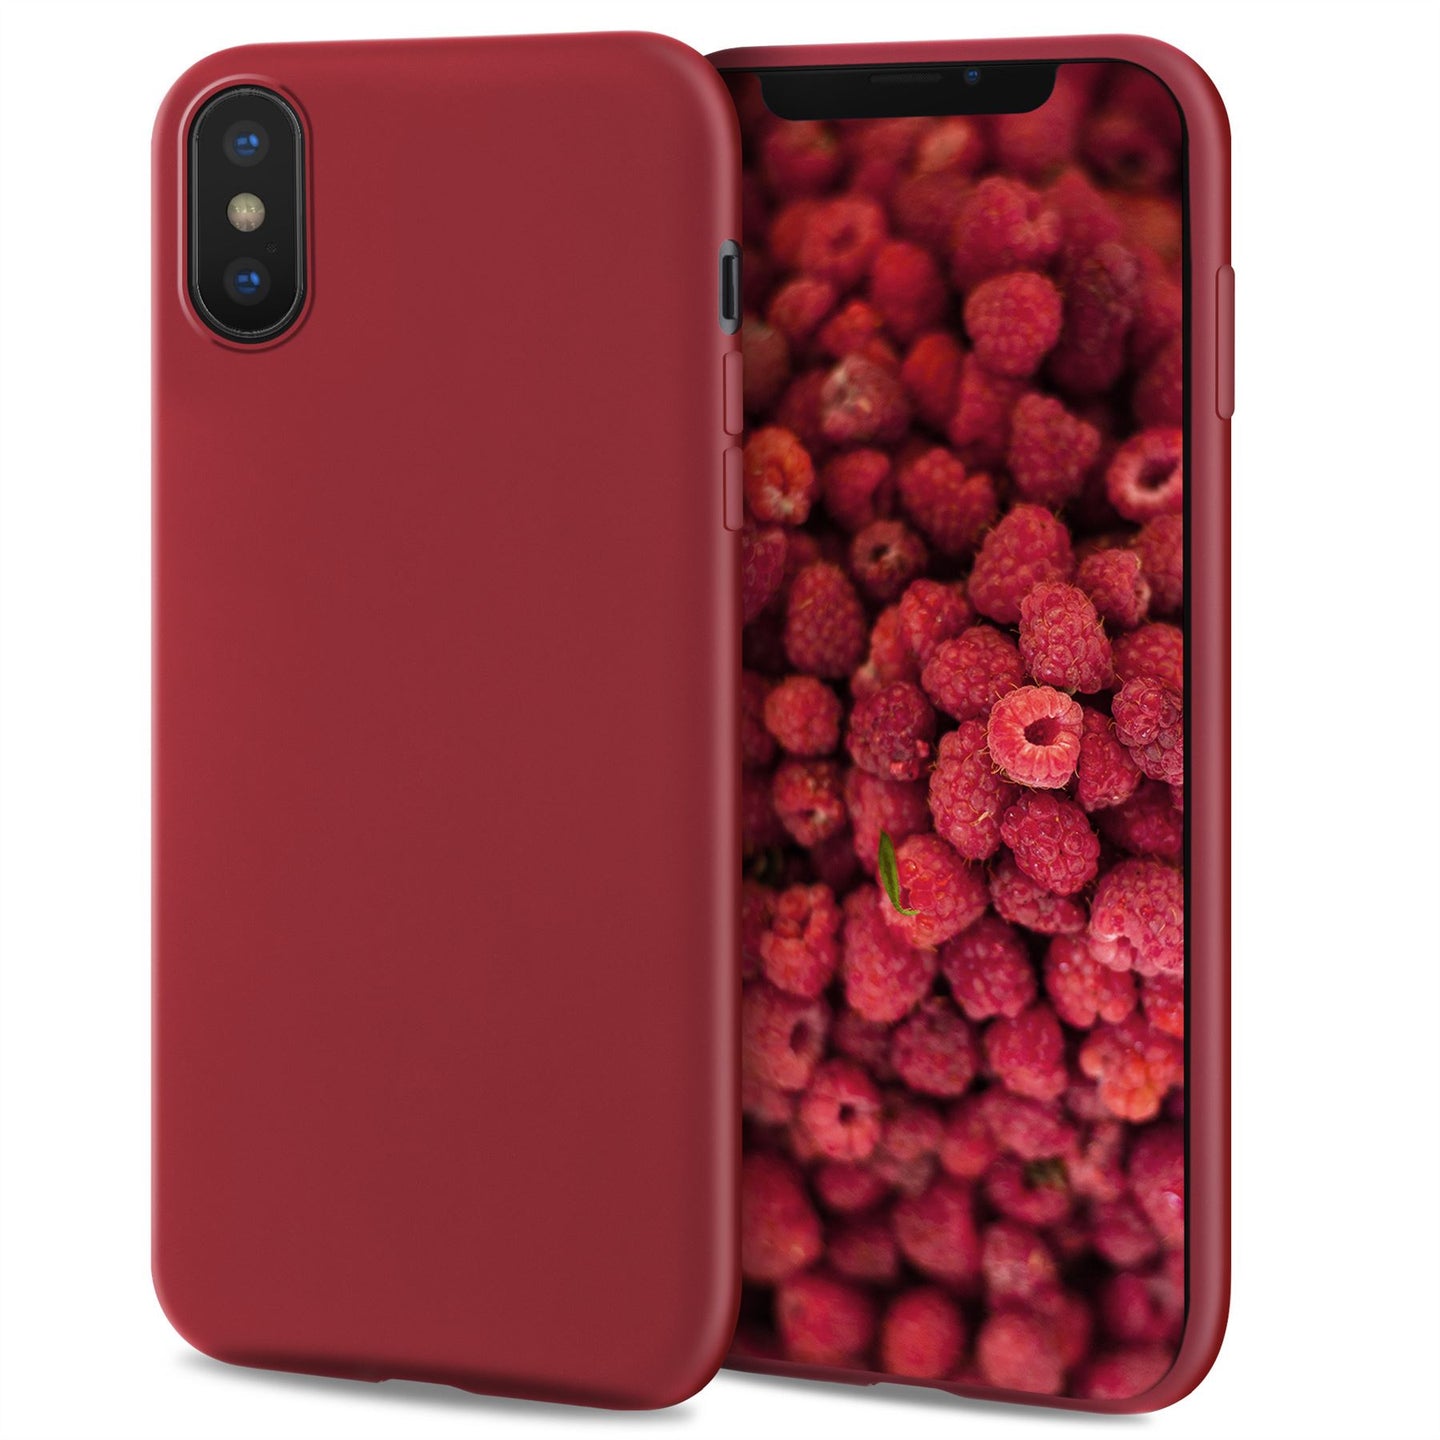 Moozy Lifestyle. Designed for iPhone X and iPhone XS Case, Vintage Pink - Liquid Silicone Cover with Matte Finish and Soft Microfiber Lining